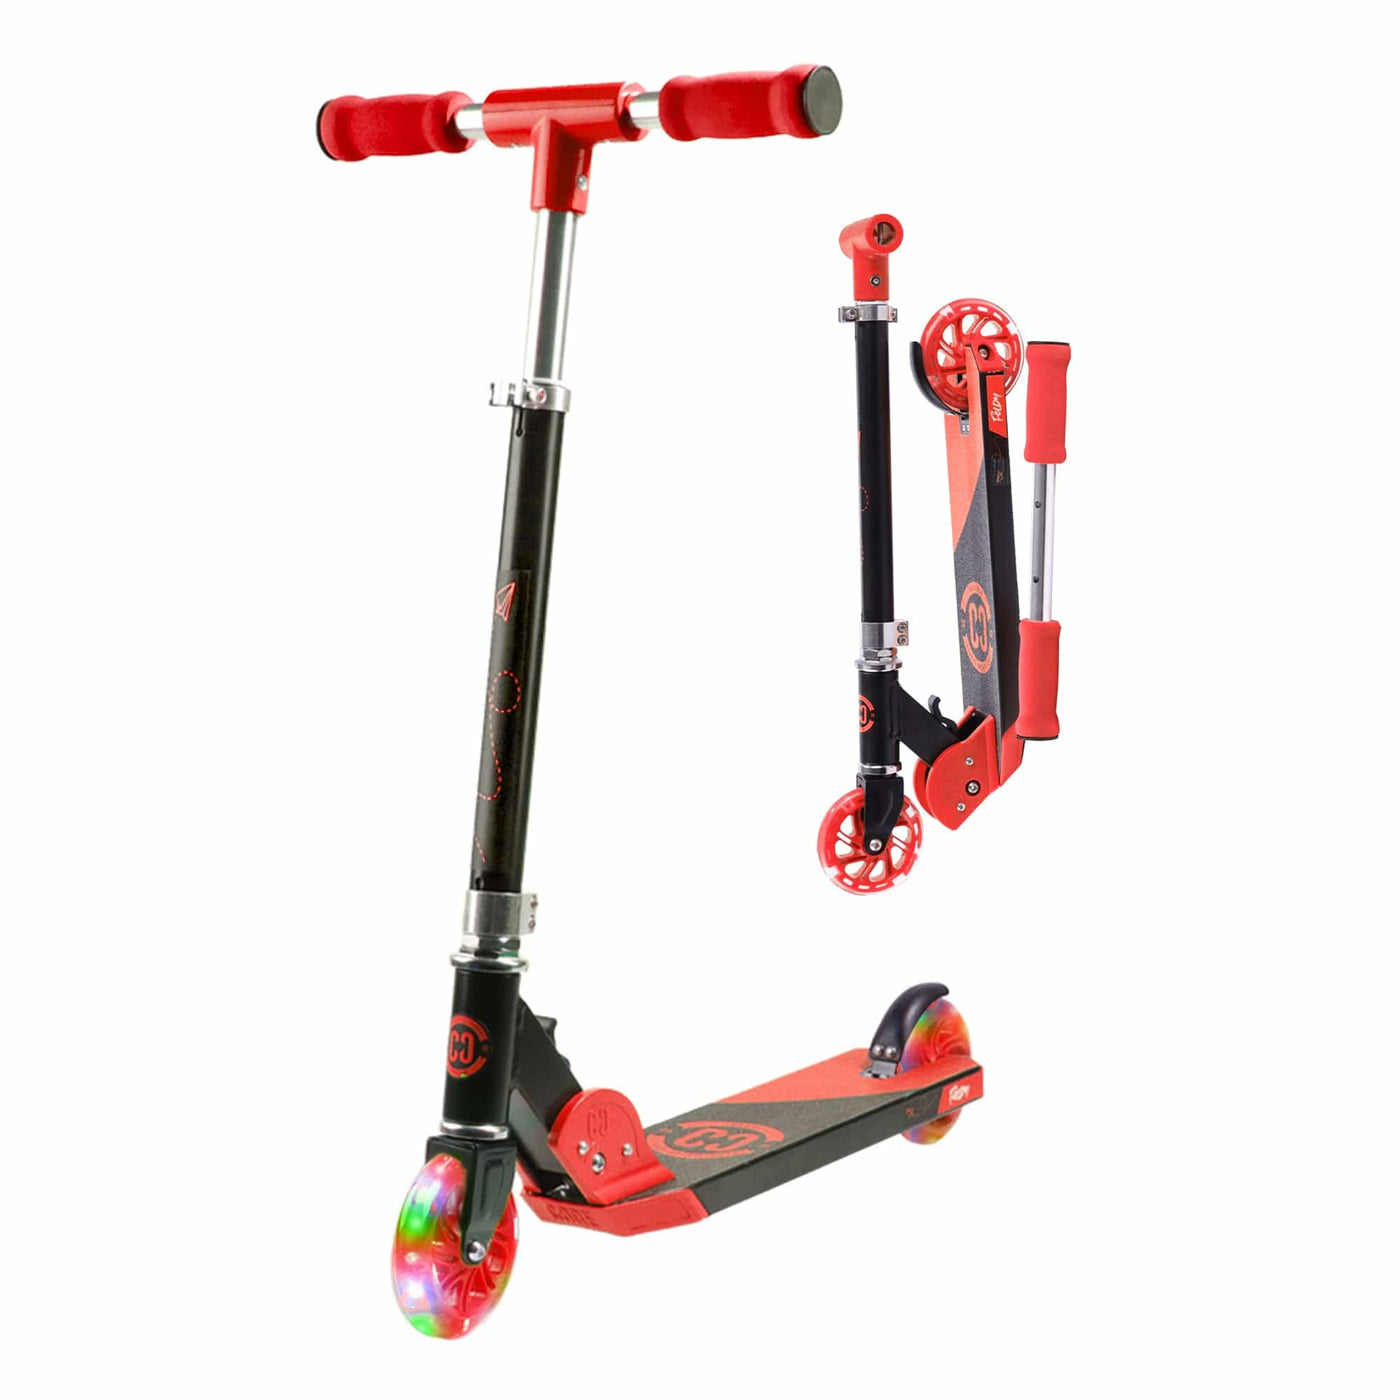 CORE Kids Foldy Black & Red Kick Scooter For Kids I Kick Scooter For Kids Fold Upright